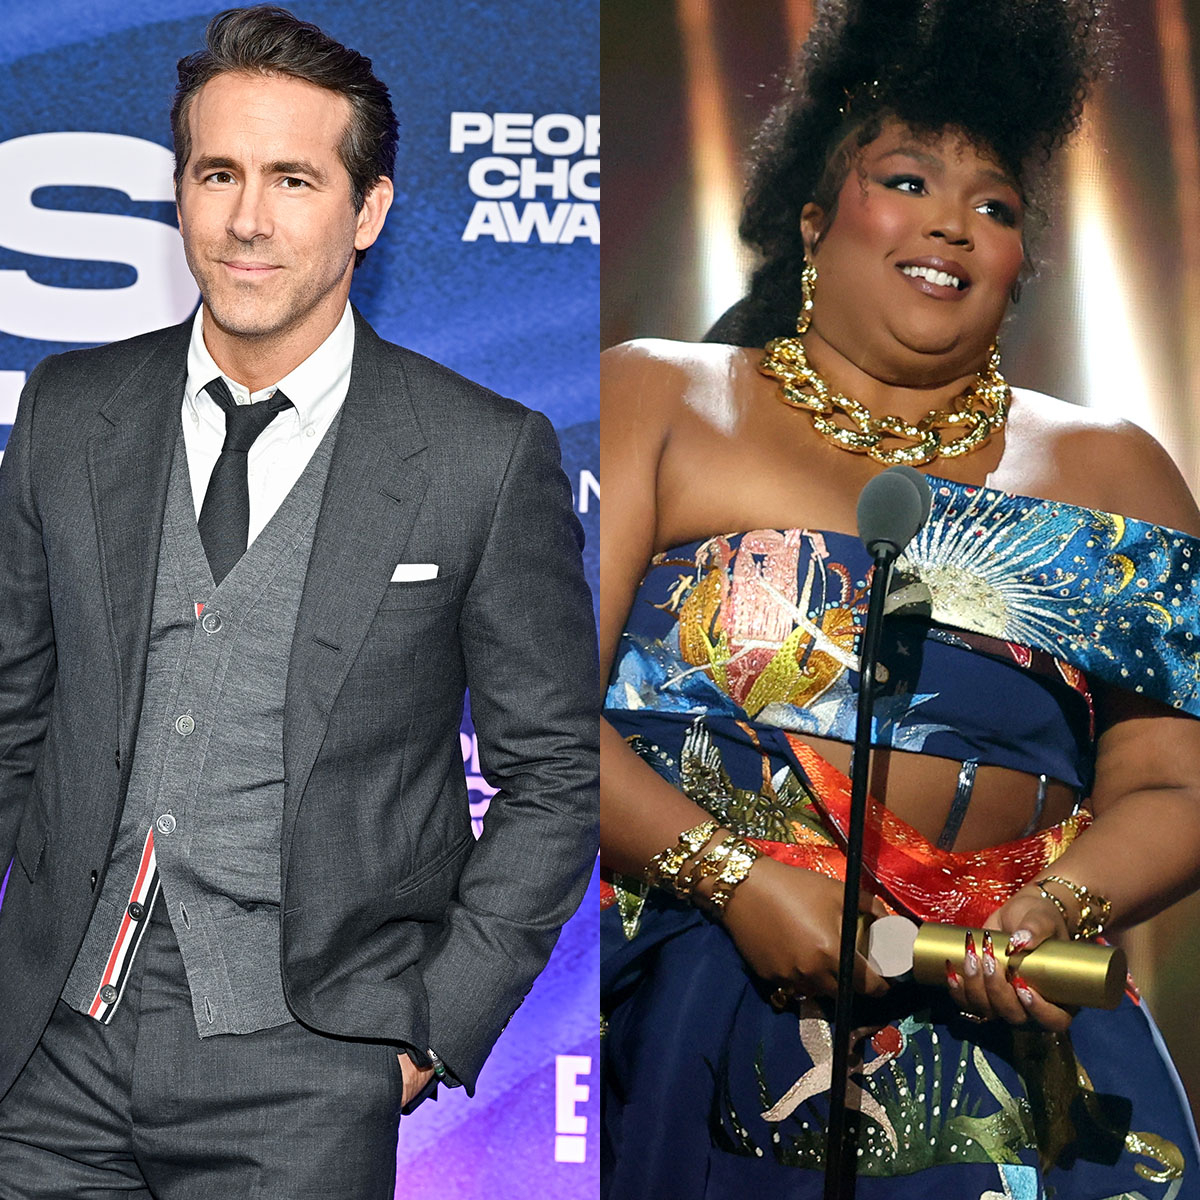 You Need to See These Candid Pics of Ryan Reynolds, Lizzo and More at the 2022 People’s Choice Awards – E! Online